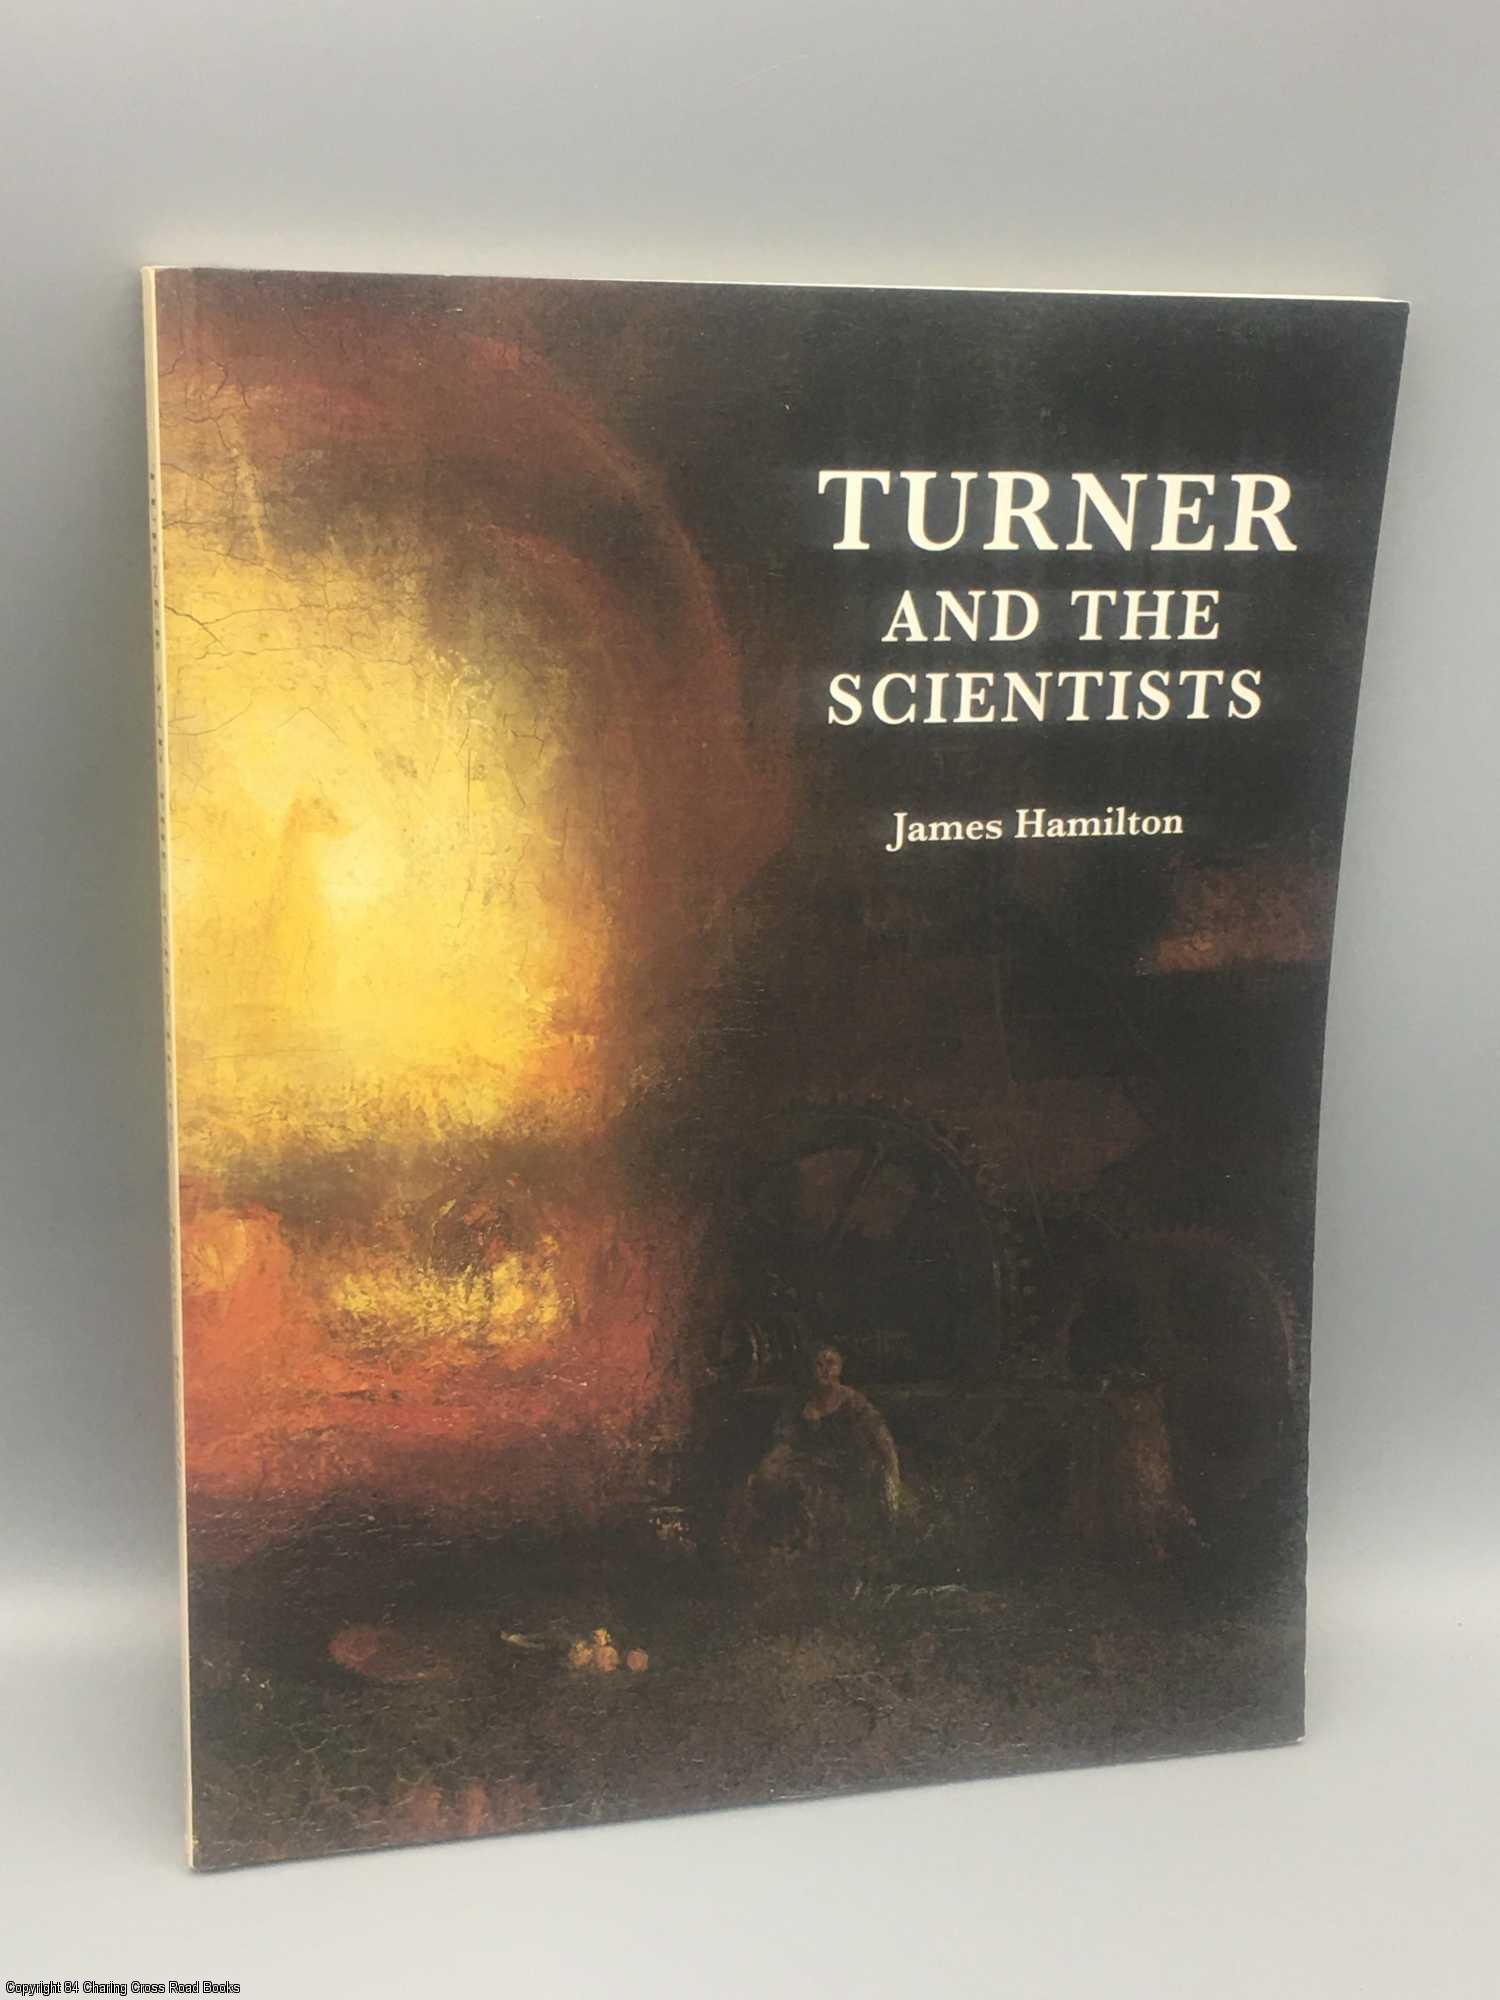 Turner and the Scientists James Hamilton First Edition